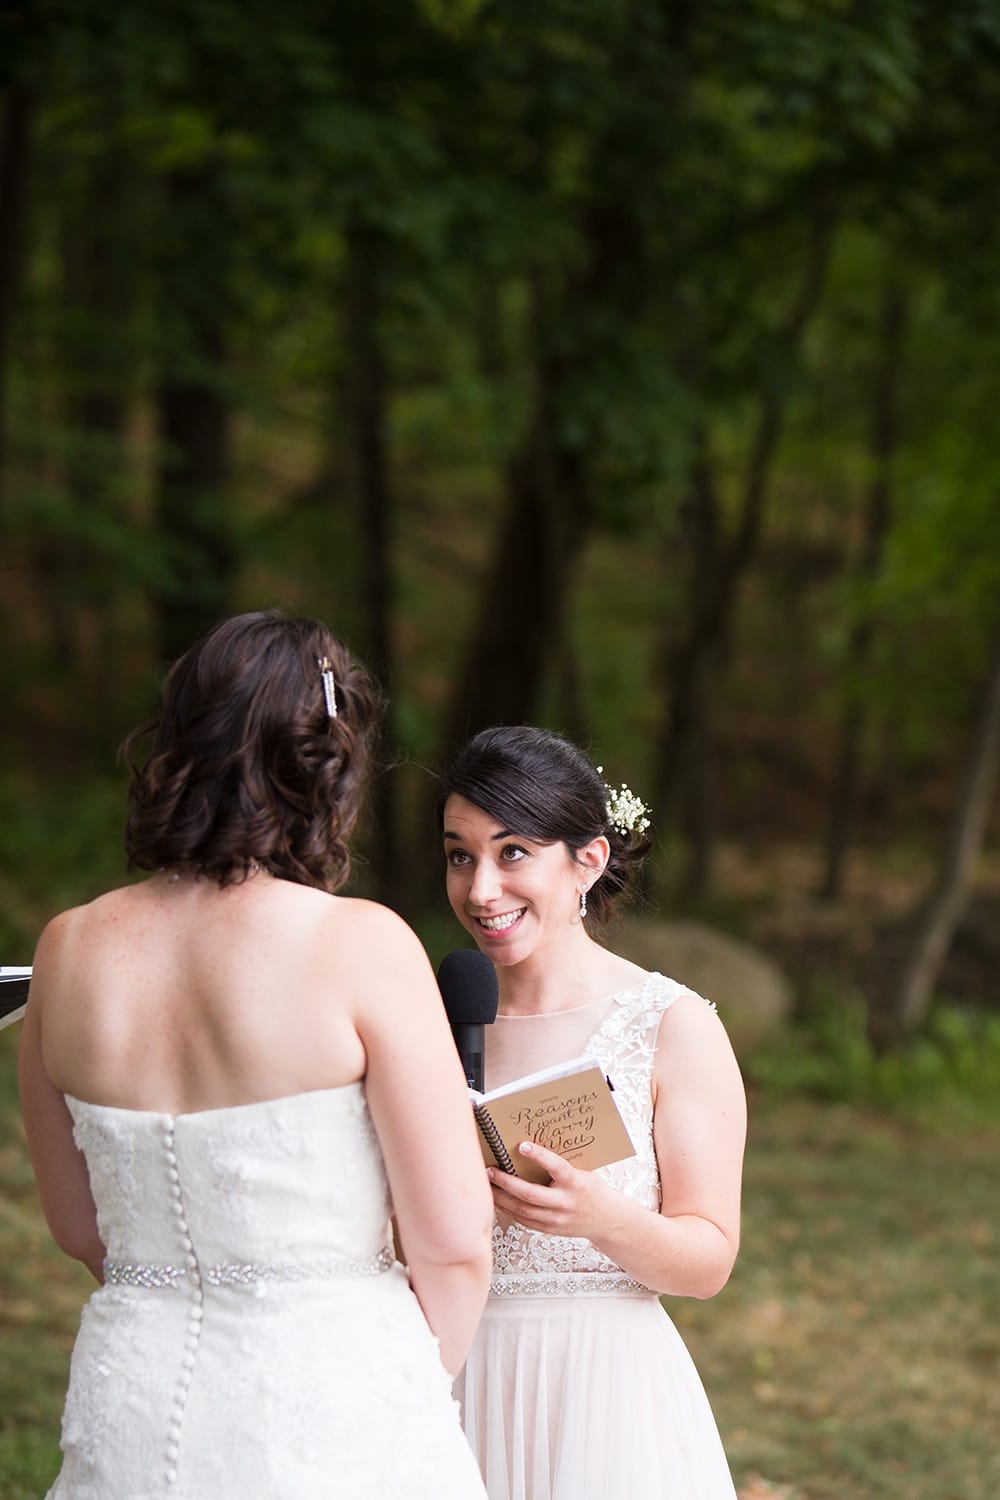 A documentary photograph of a bride reading her vows during their outdoor wedding ceremony at Friendly Crossways wedding venue